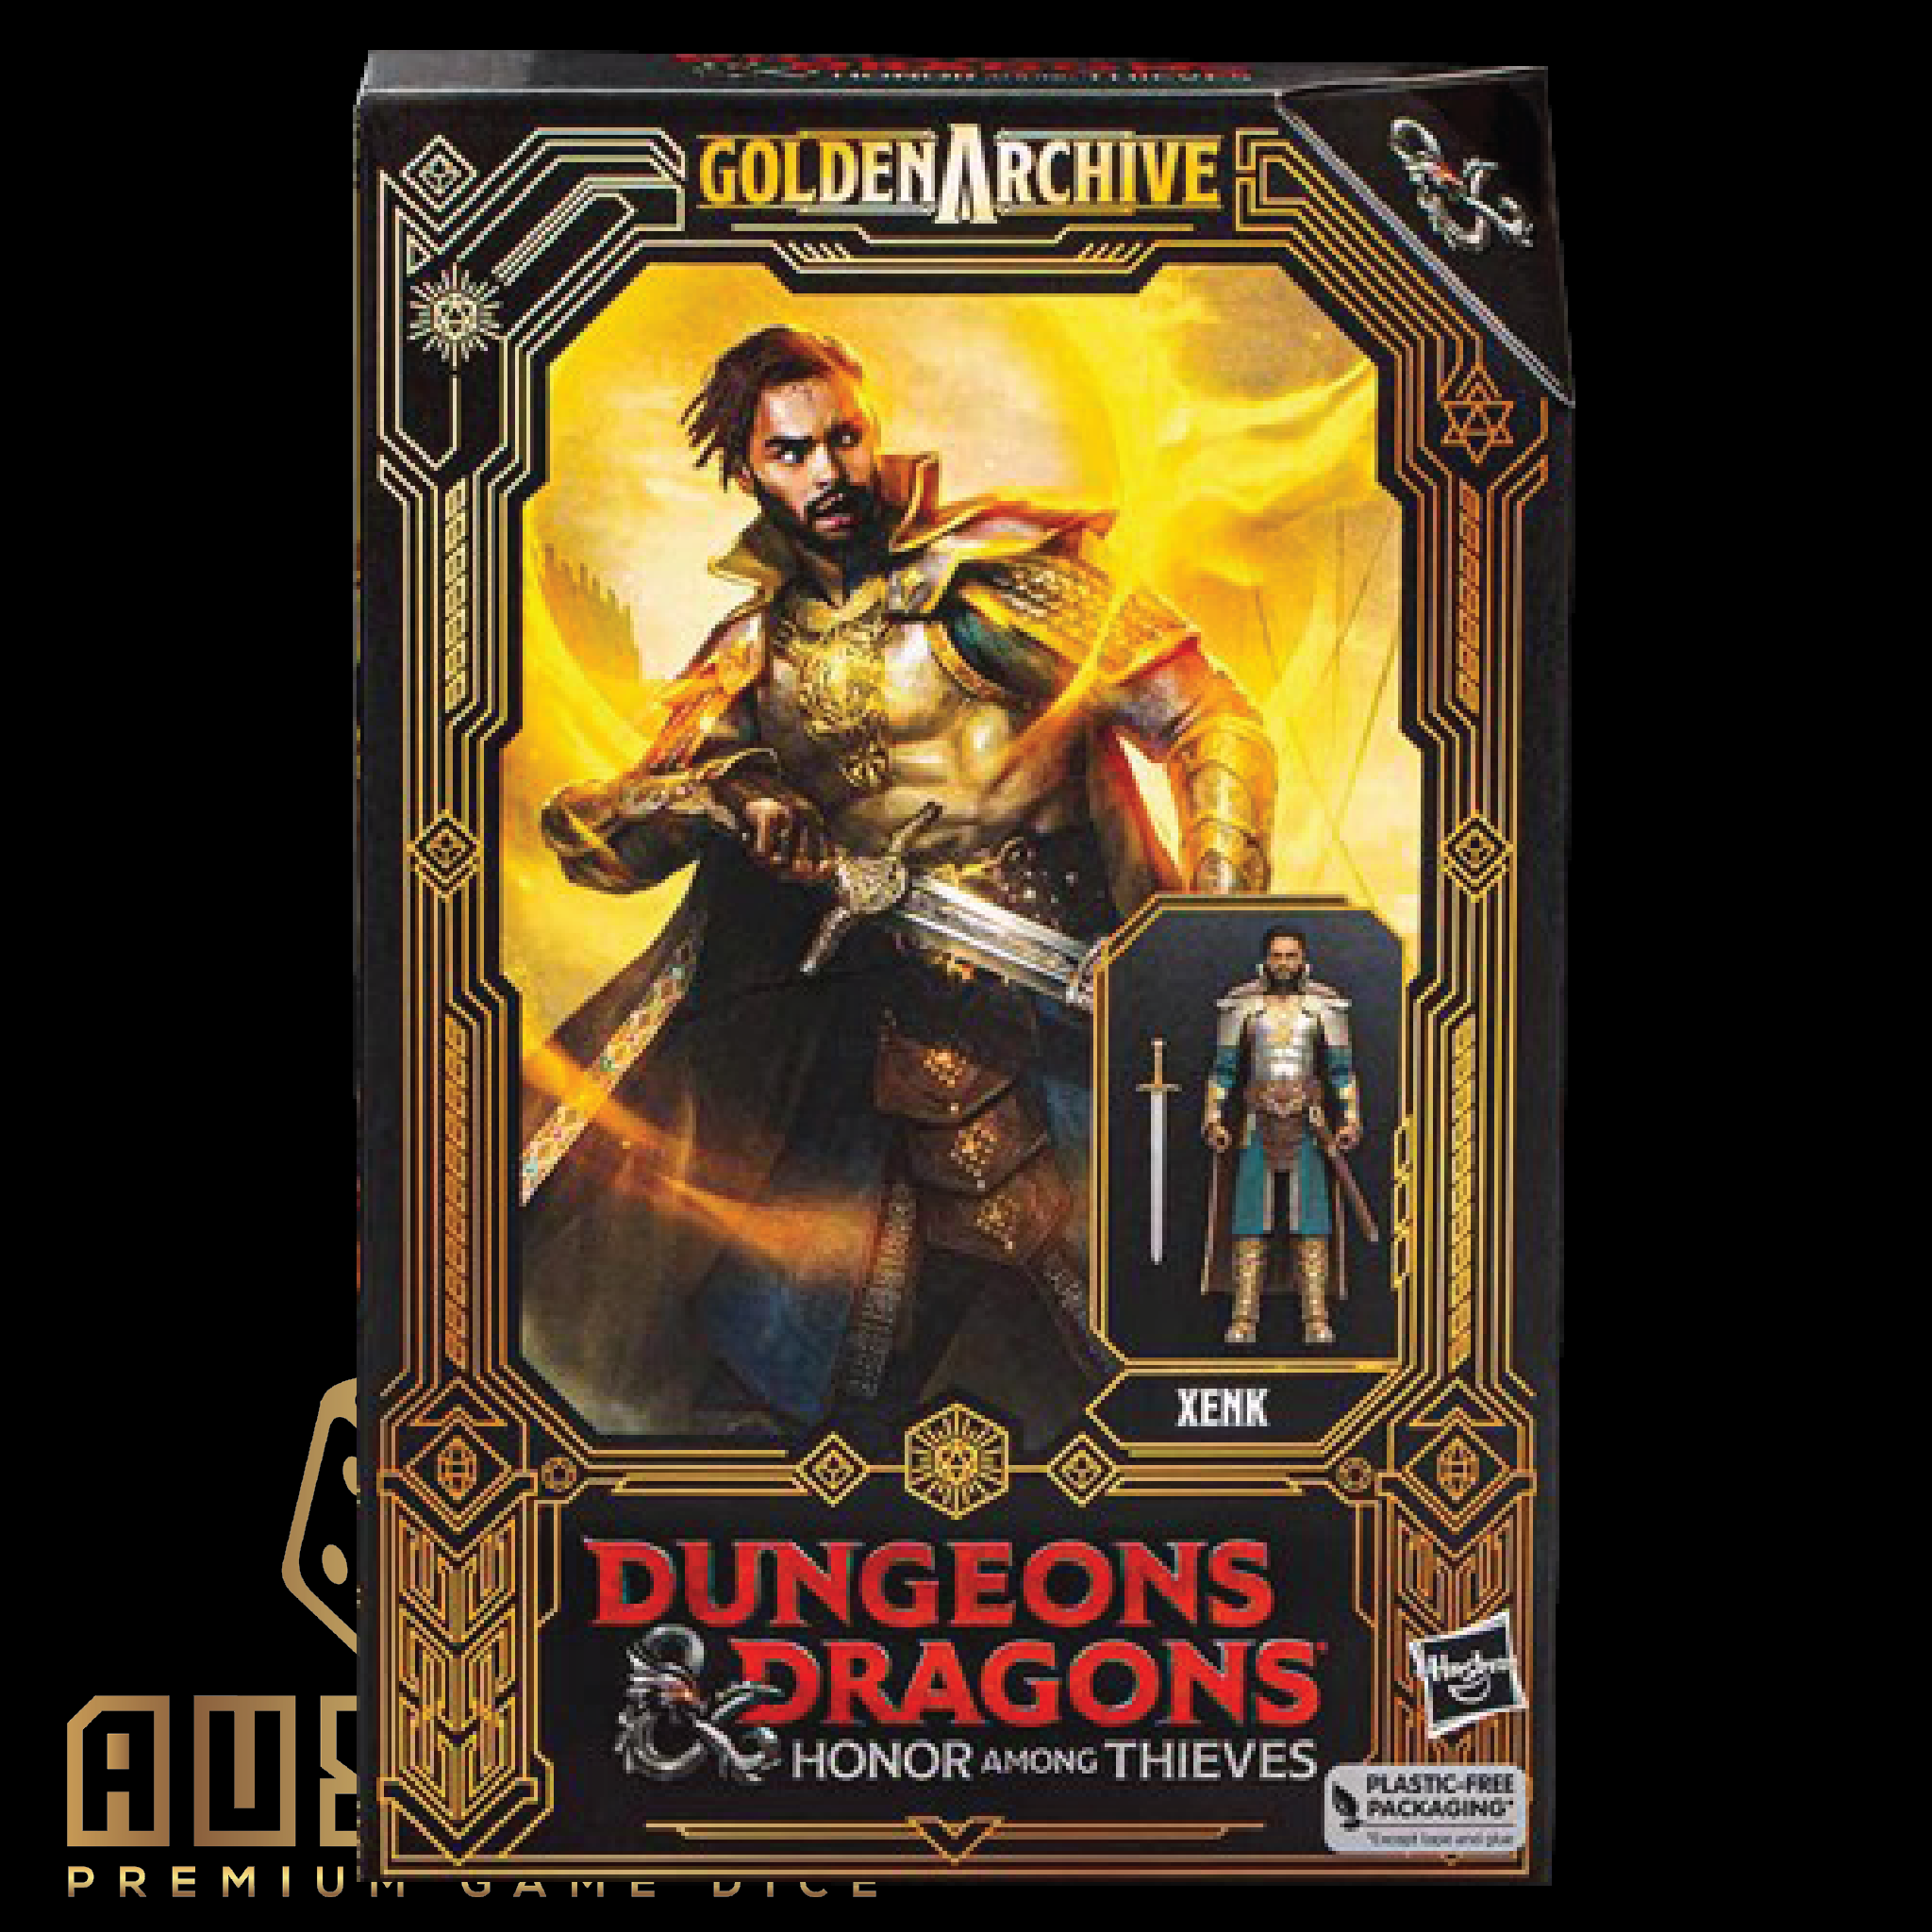 Dungeons & Dragons Golden Archive Xenk Poseable Figurine